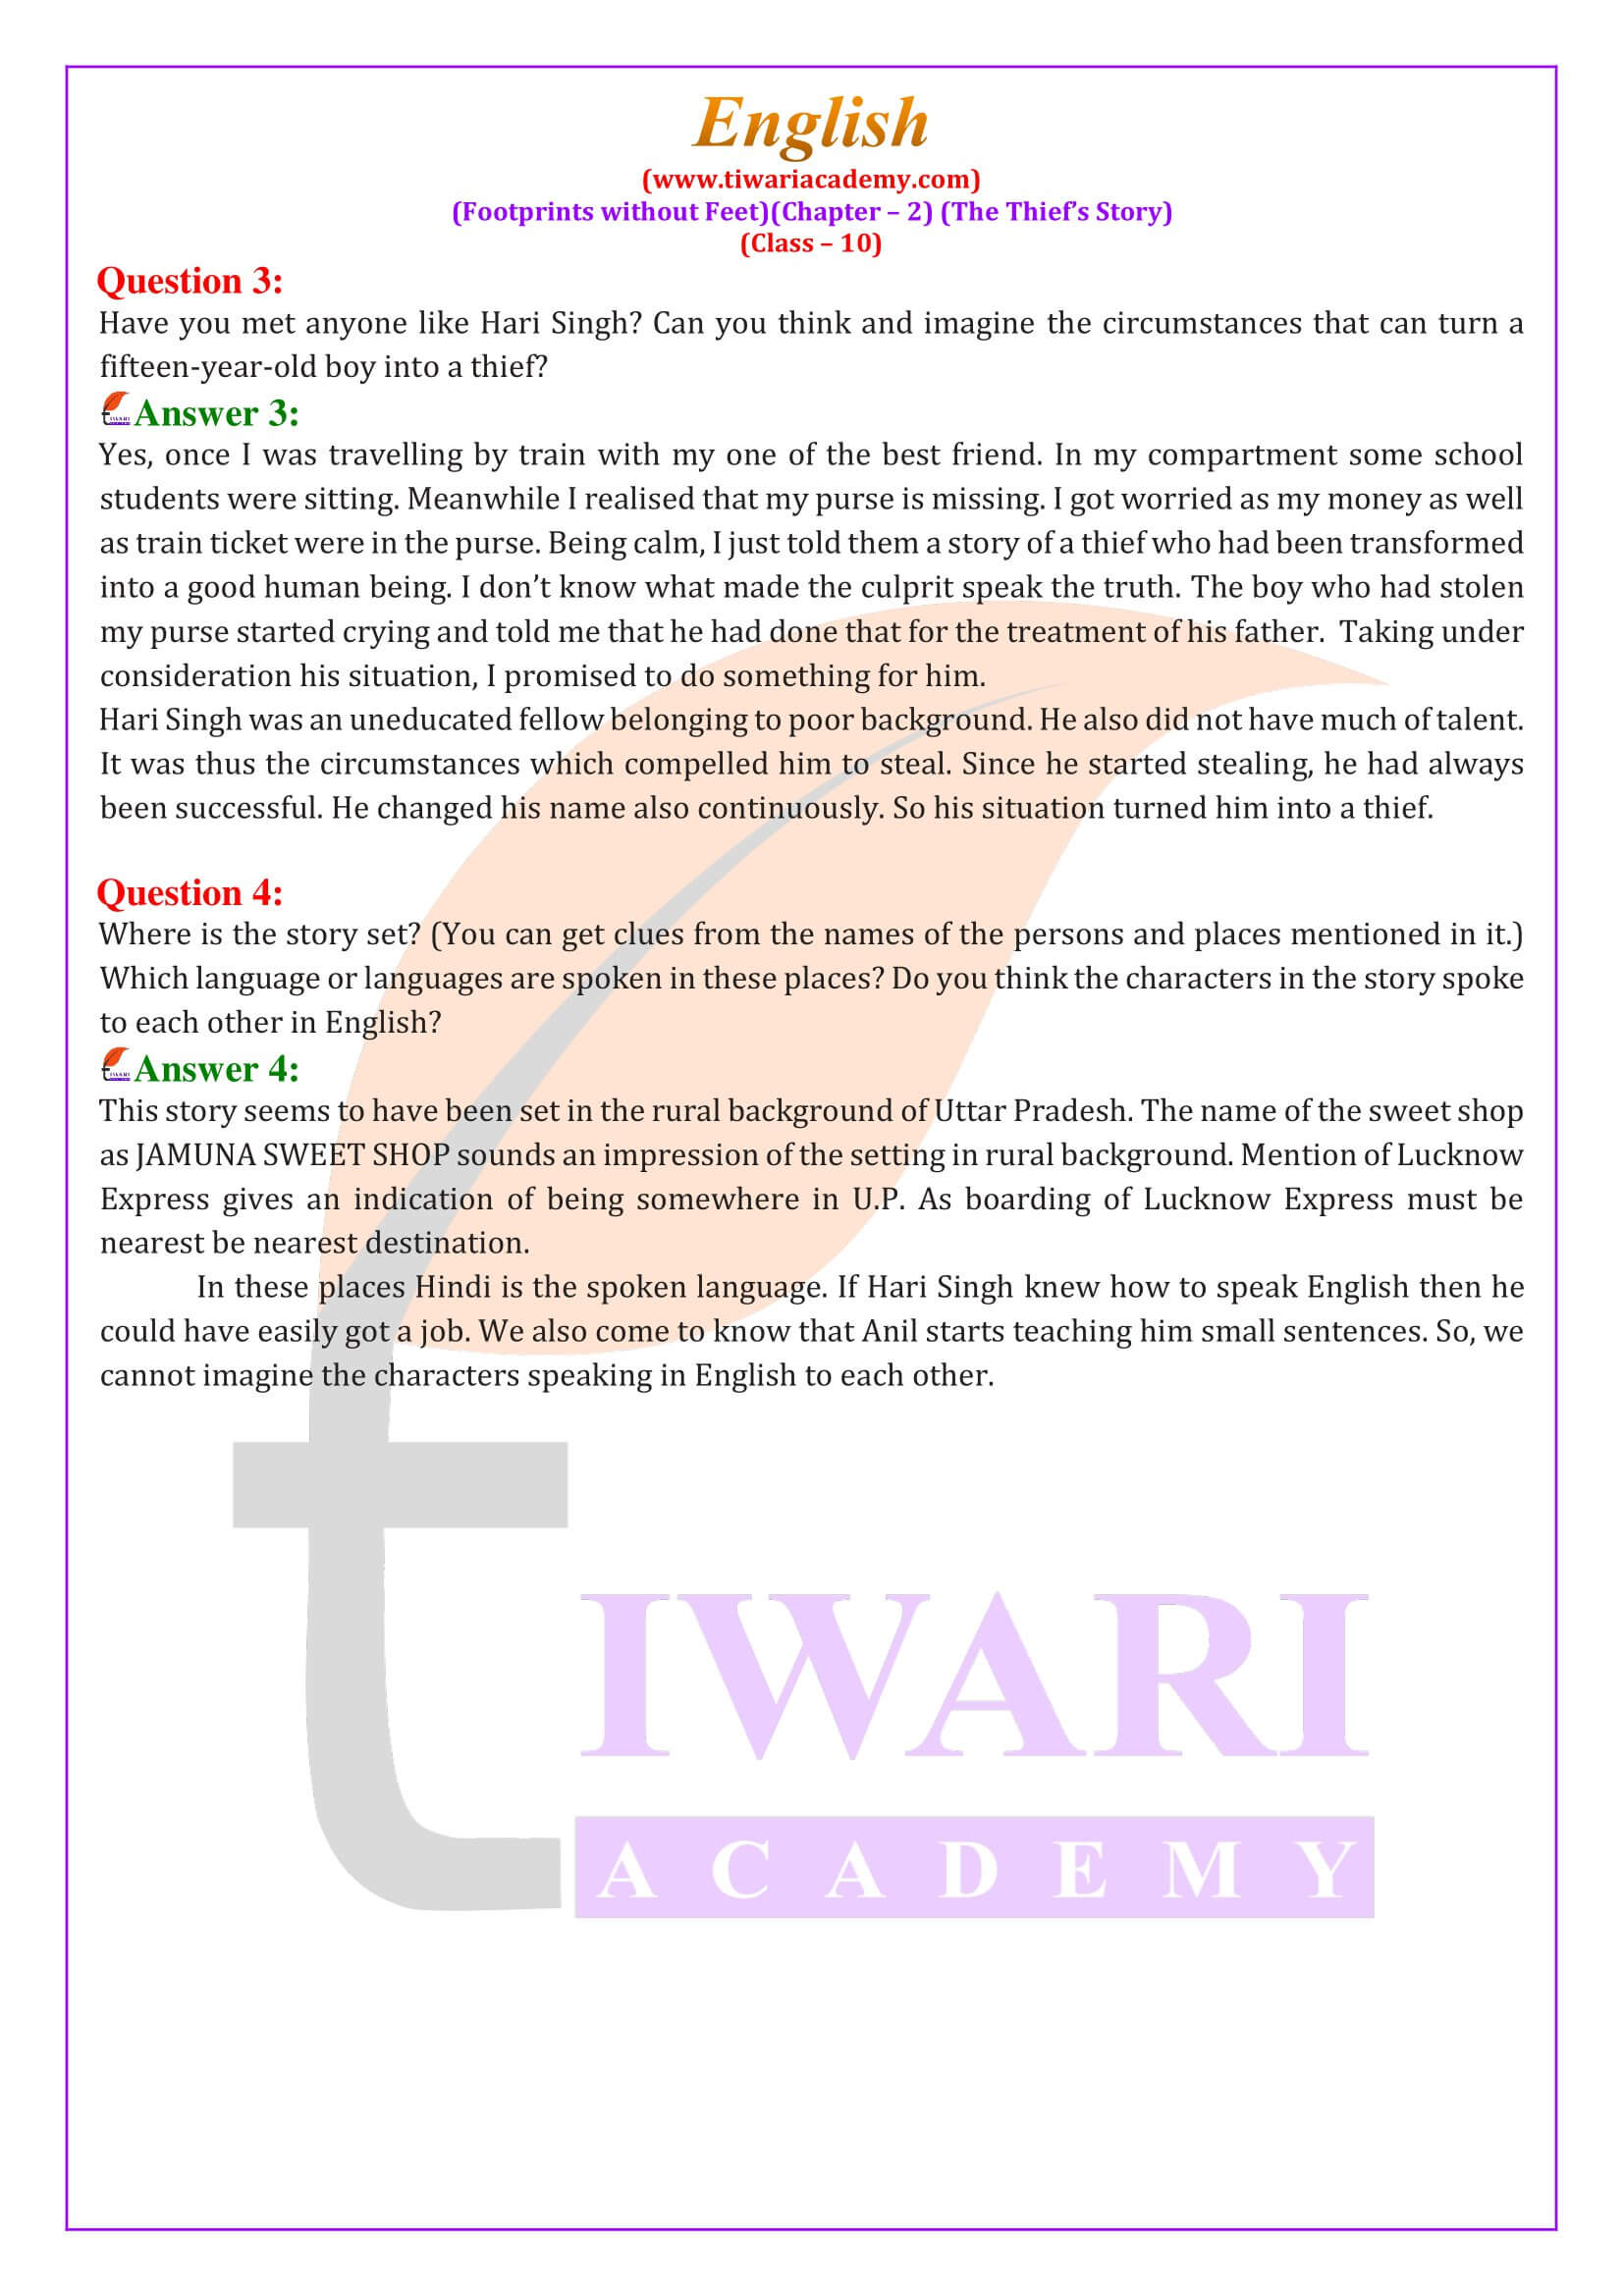 Class 10 English Chapter 2 the Thief’s Story Question Answers